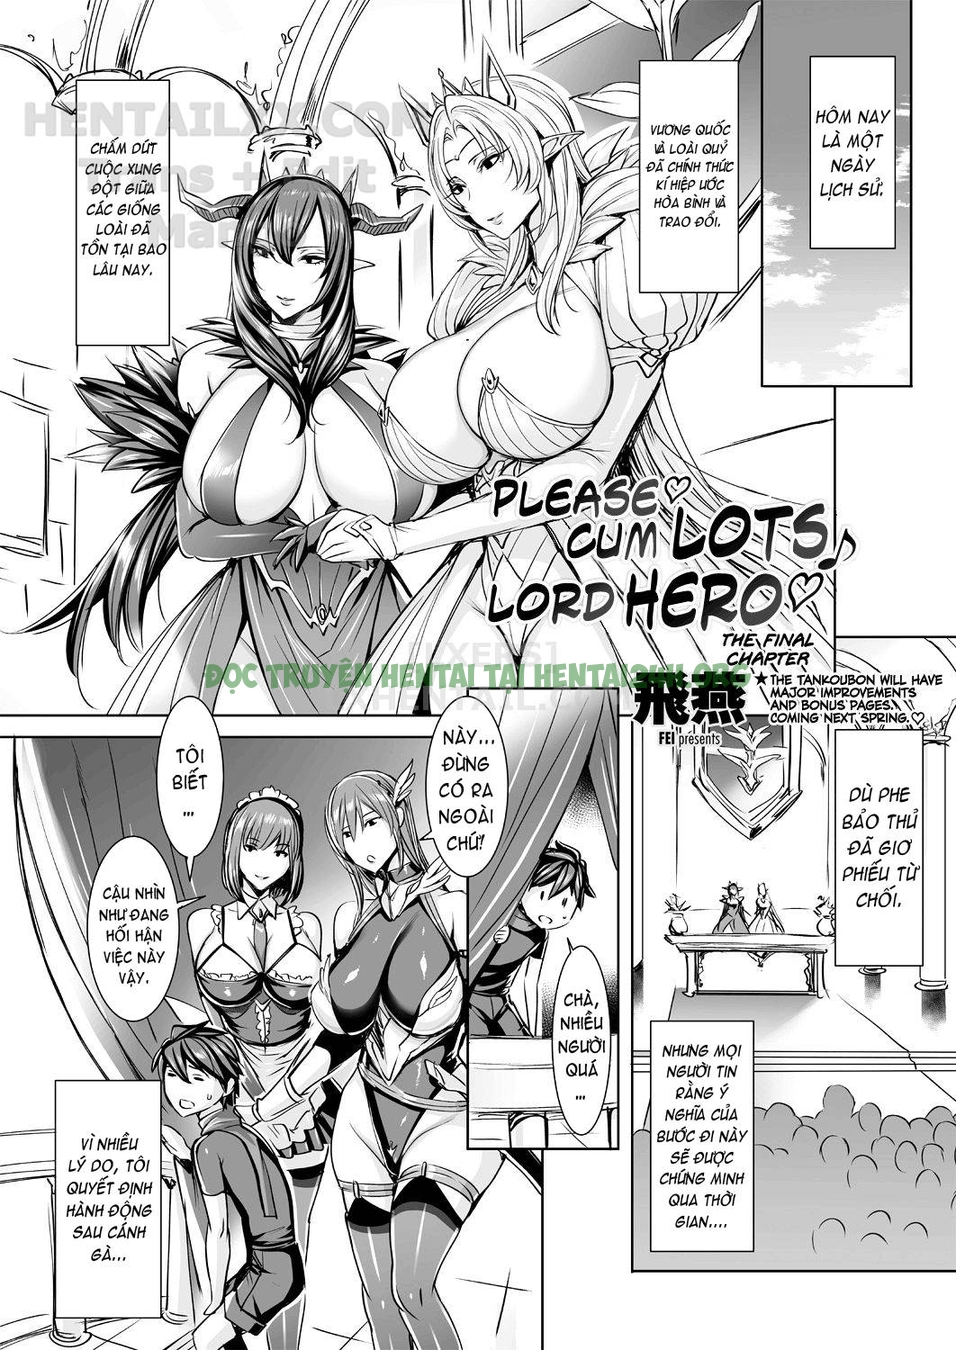 Xem ảnh Please Cum Lots Lord Hero - Chapter 9 END - 1599572935733_0 - Hentai24h.Tv